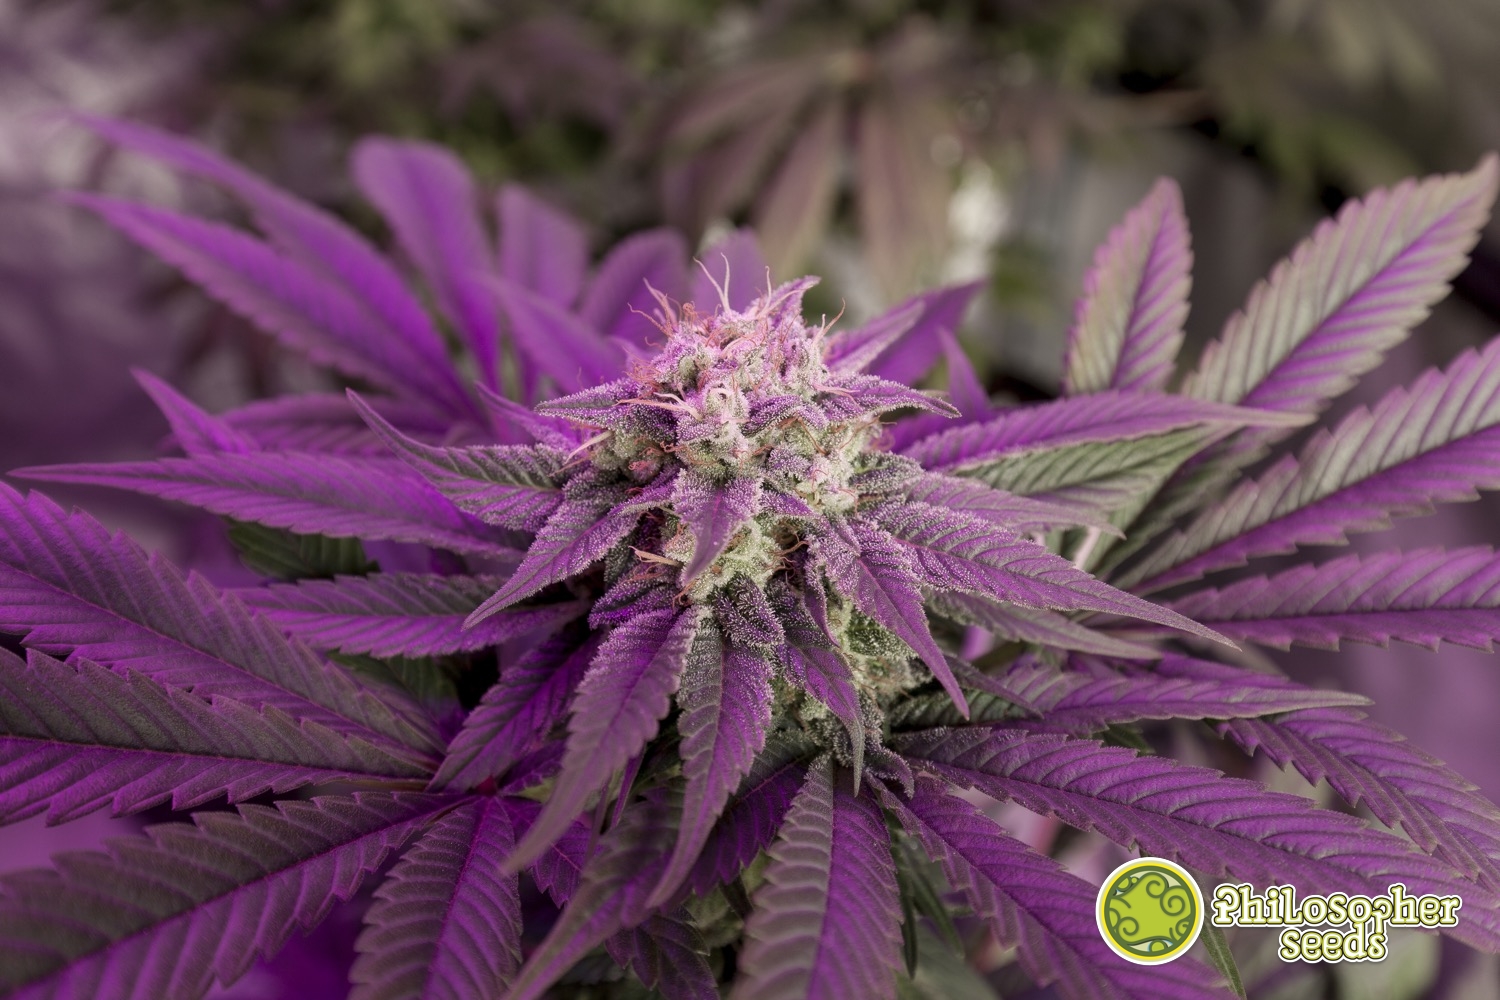 Grow Lights for indoor cannabis cultivation